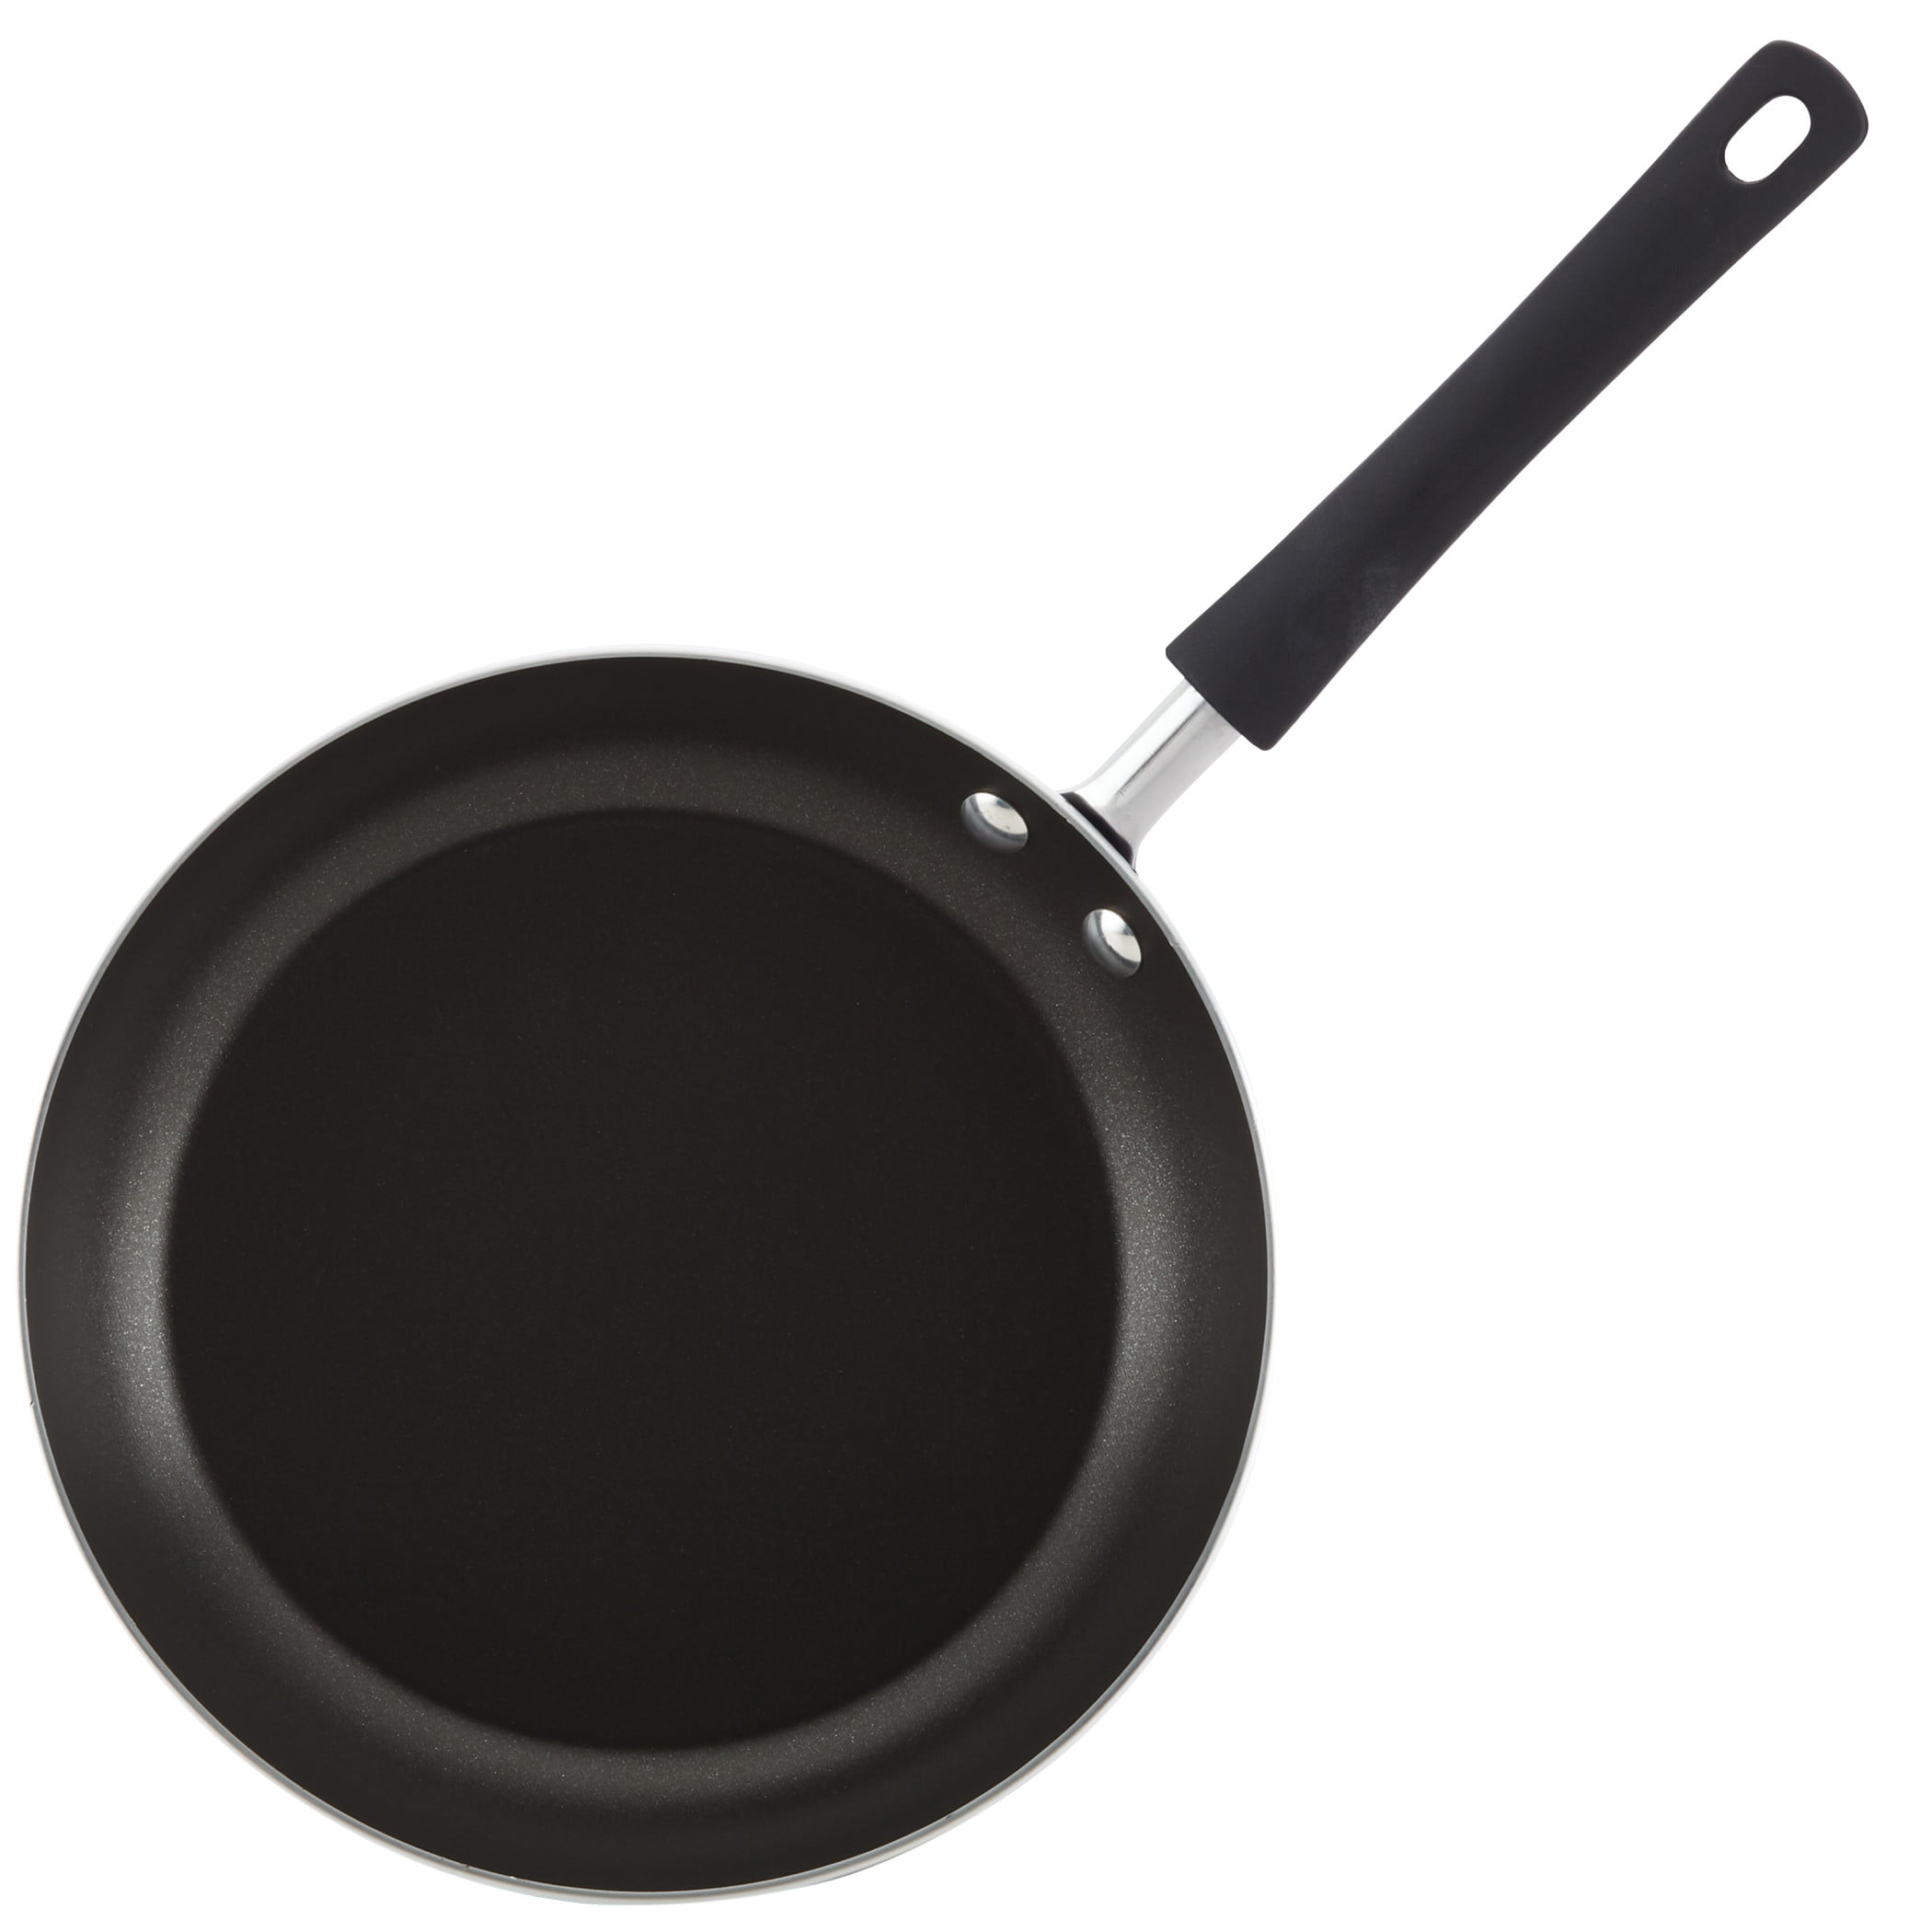 NEW Farberware 5 In. Long Replacement Handle for Pots & Pans Part Black NEW